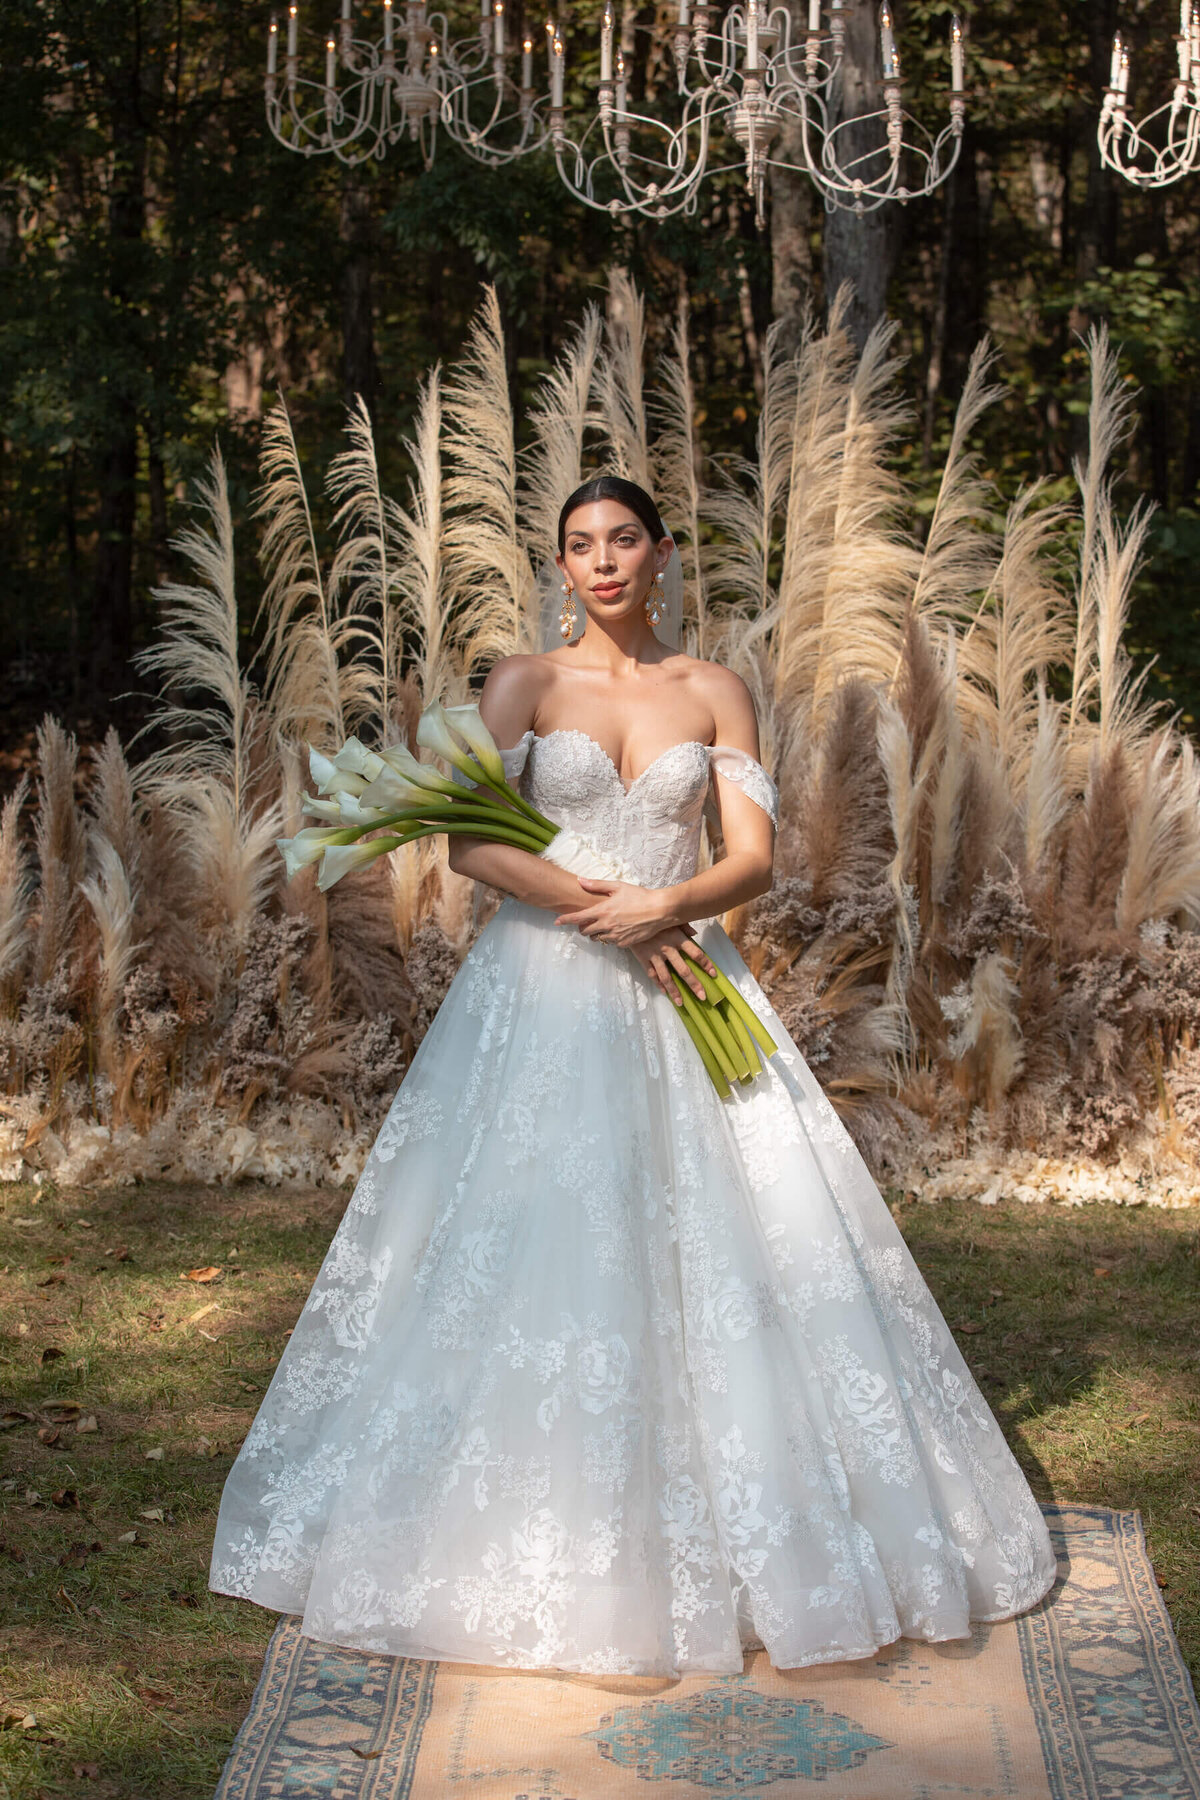 Bride with calla lilly wedding bouquet and pampas grass wedding altar.